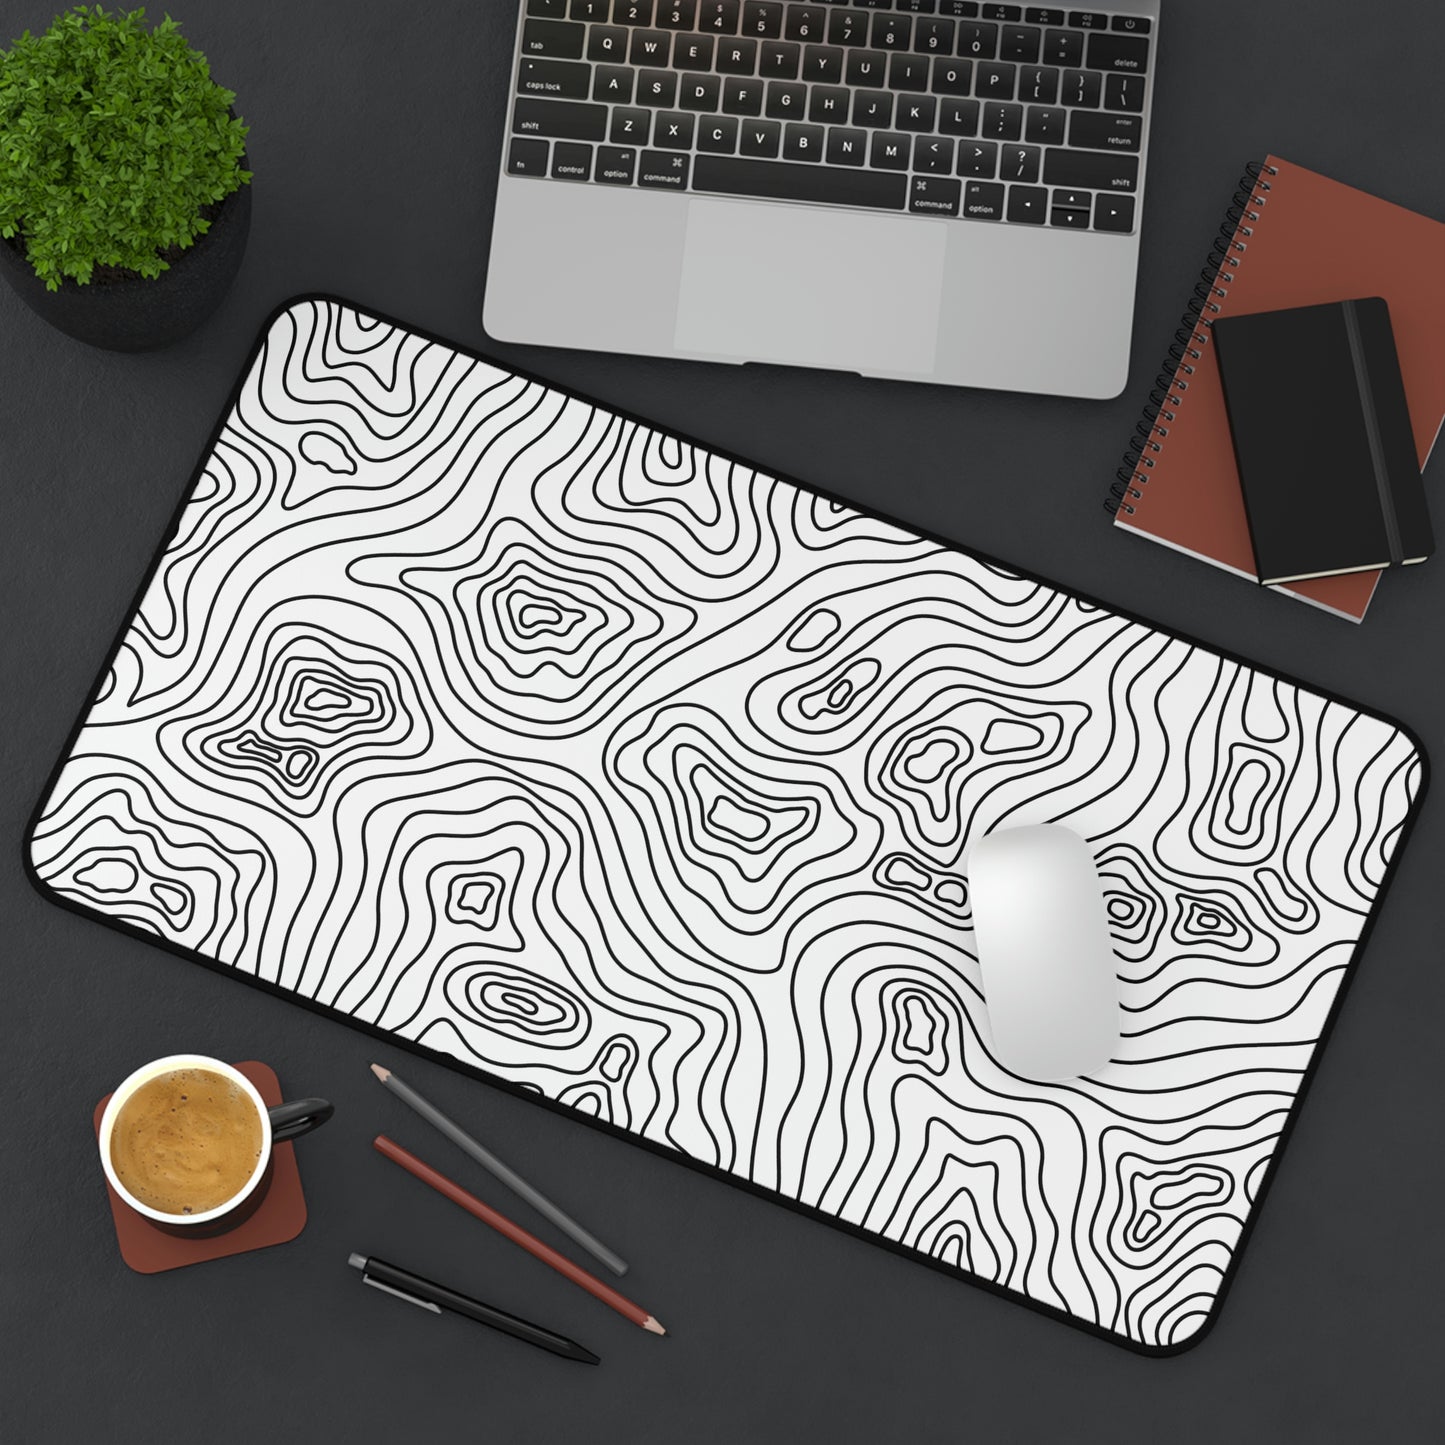 A 12" x 22" white desk mat with black topographic lines sitting at an angle. A mouse sits on top of it.